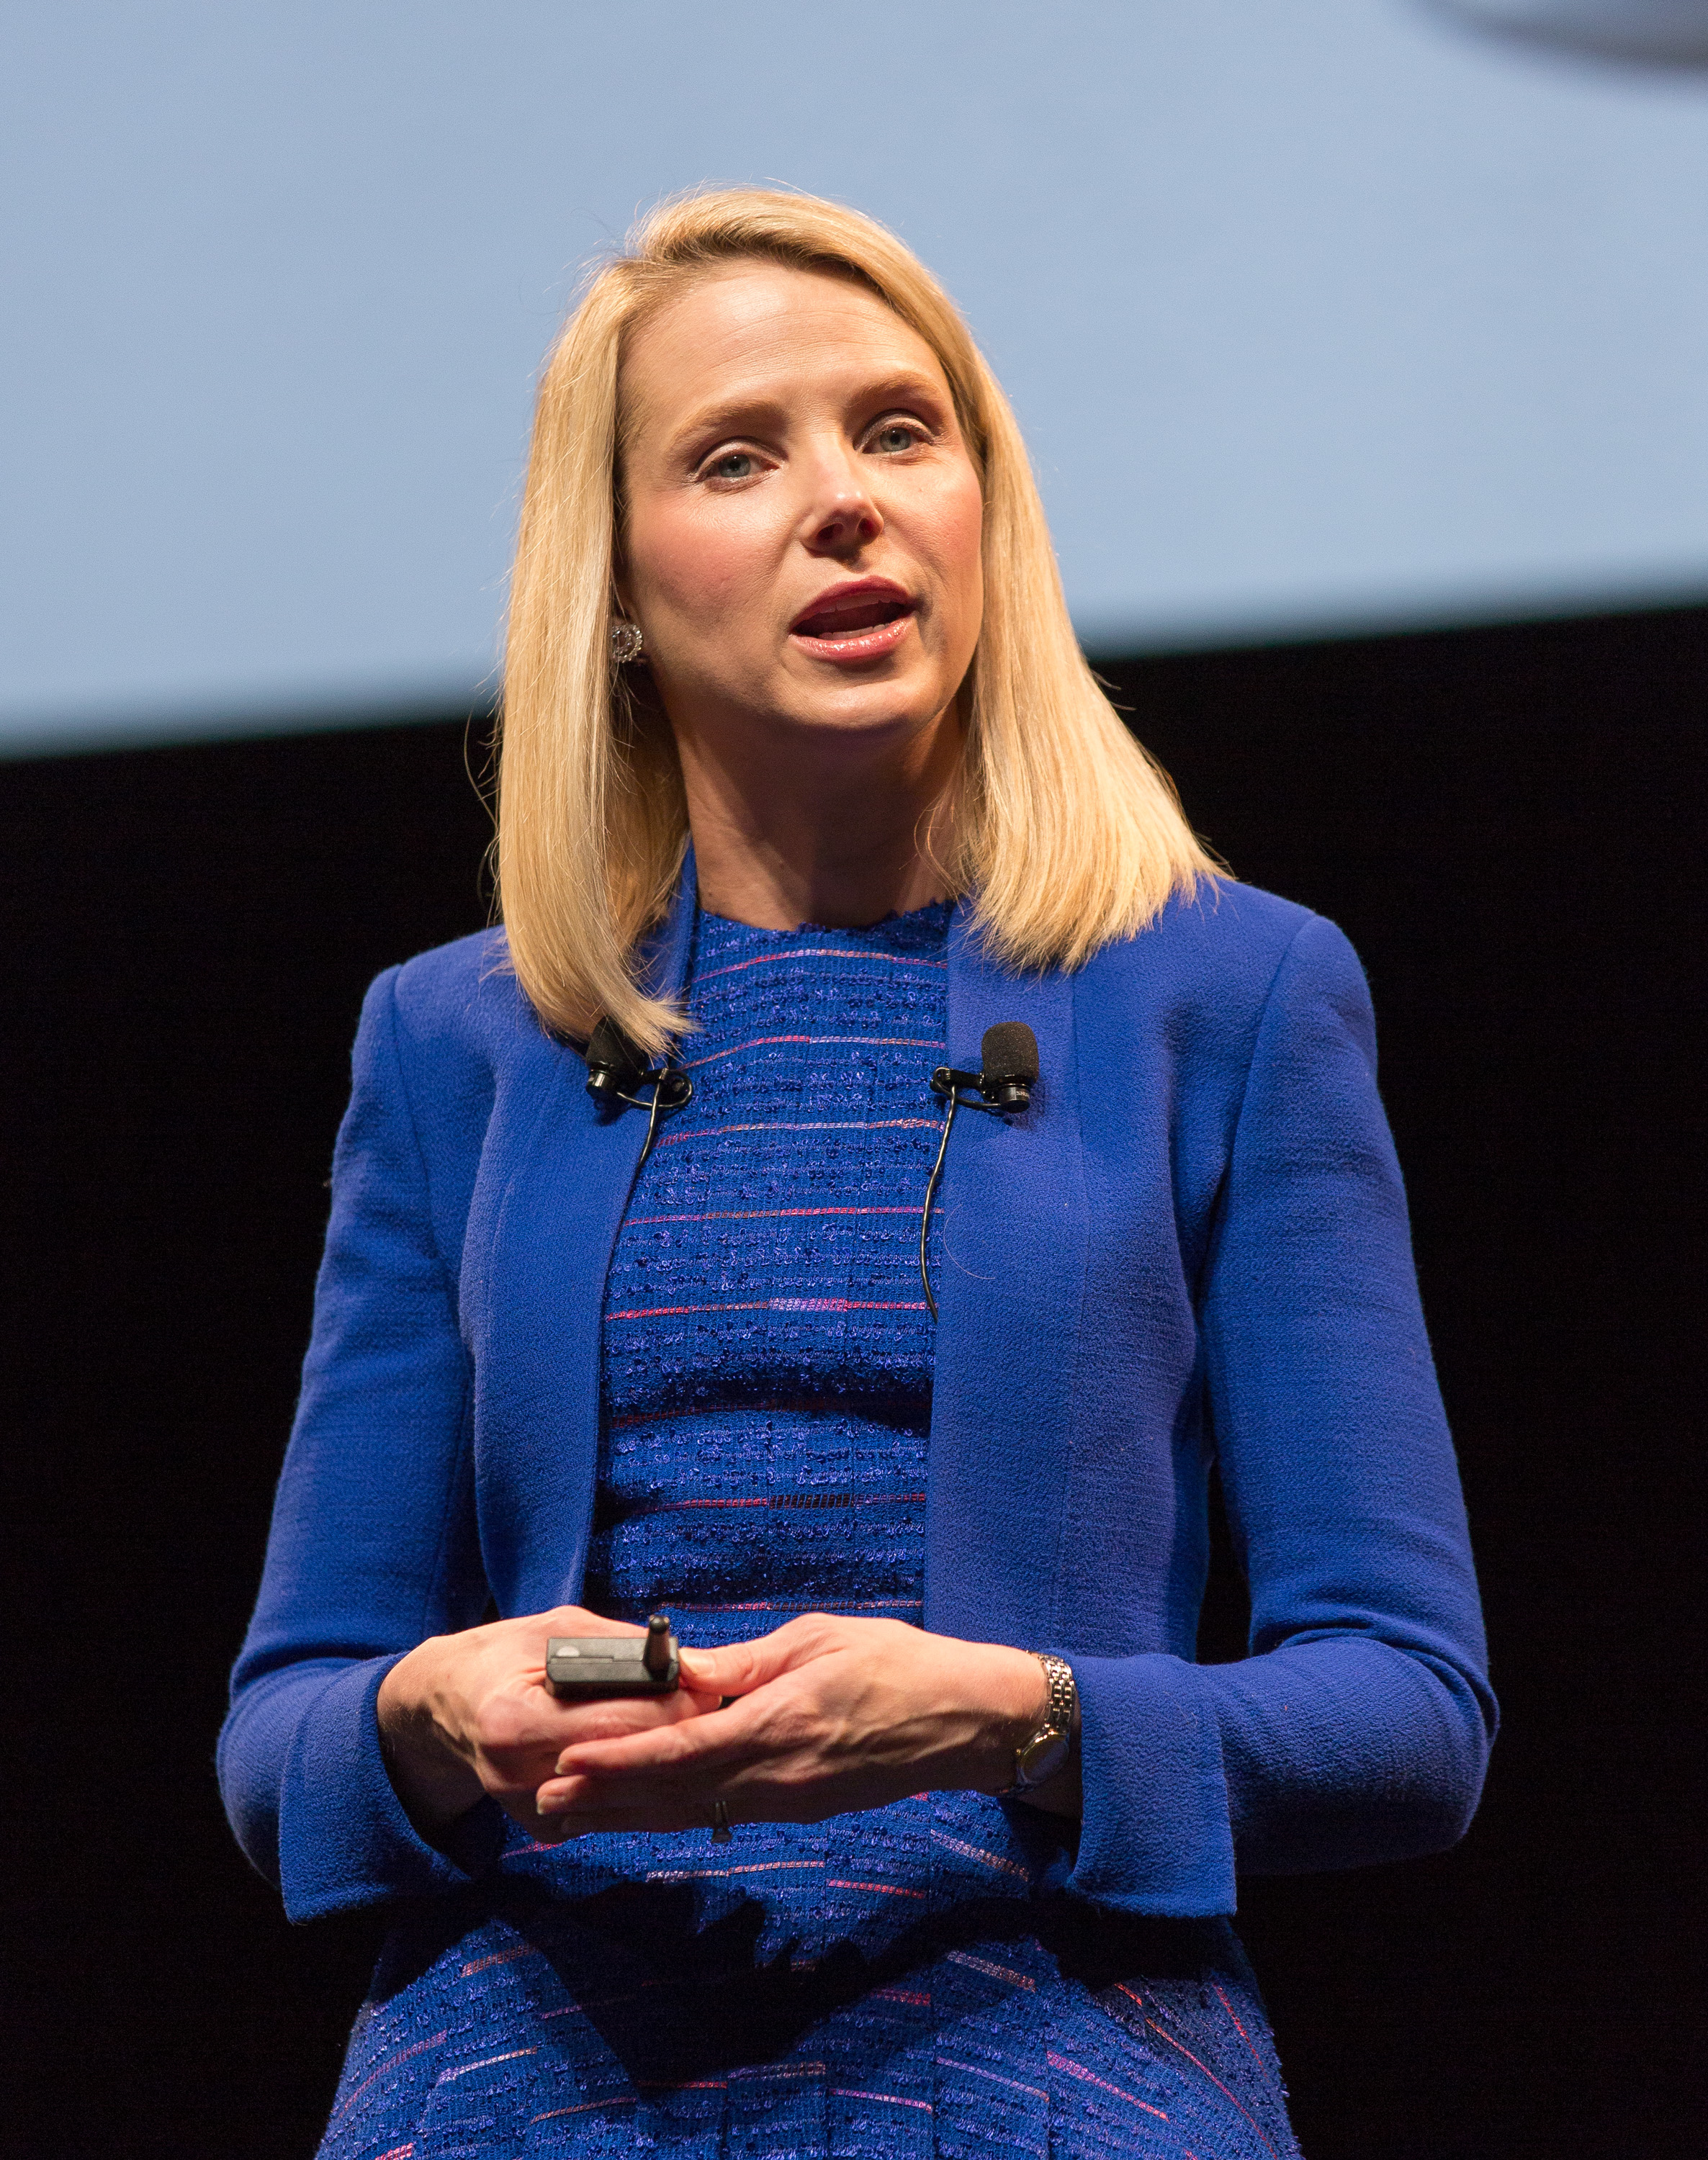 Chief executive officer of Yahoo! Inc., Marissa Mayer at the 2014 Cannes Lions in Cannes, France on June 17, 2014.